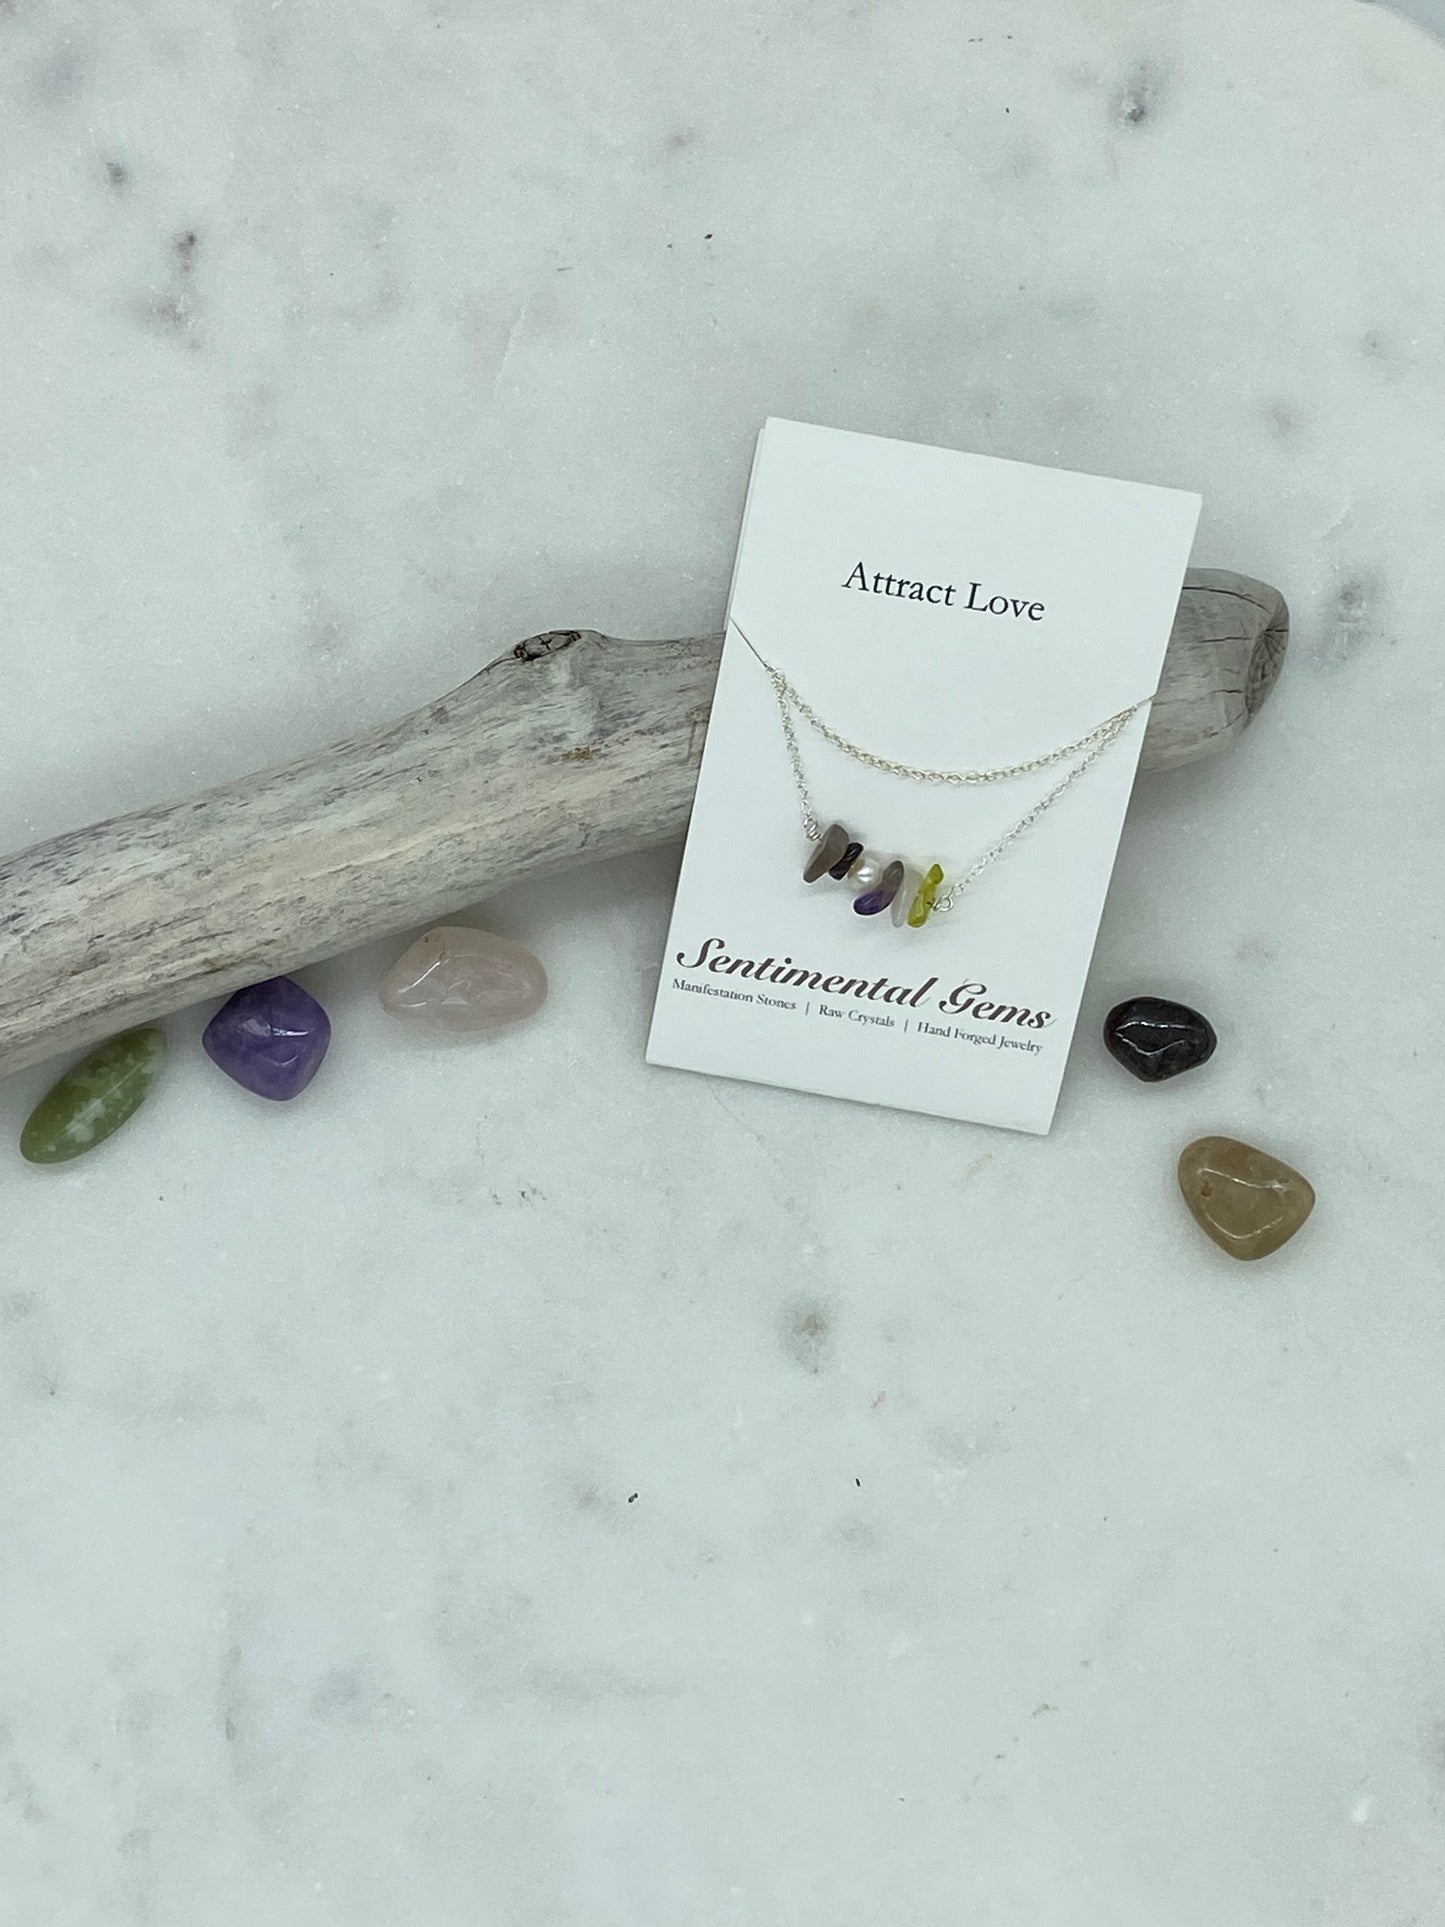 Attract Love Crystals Gift Set